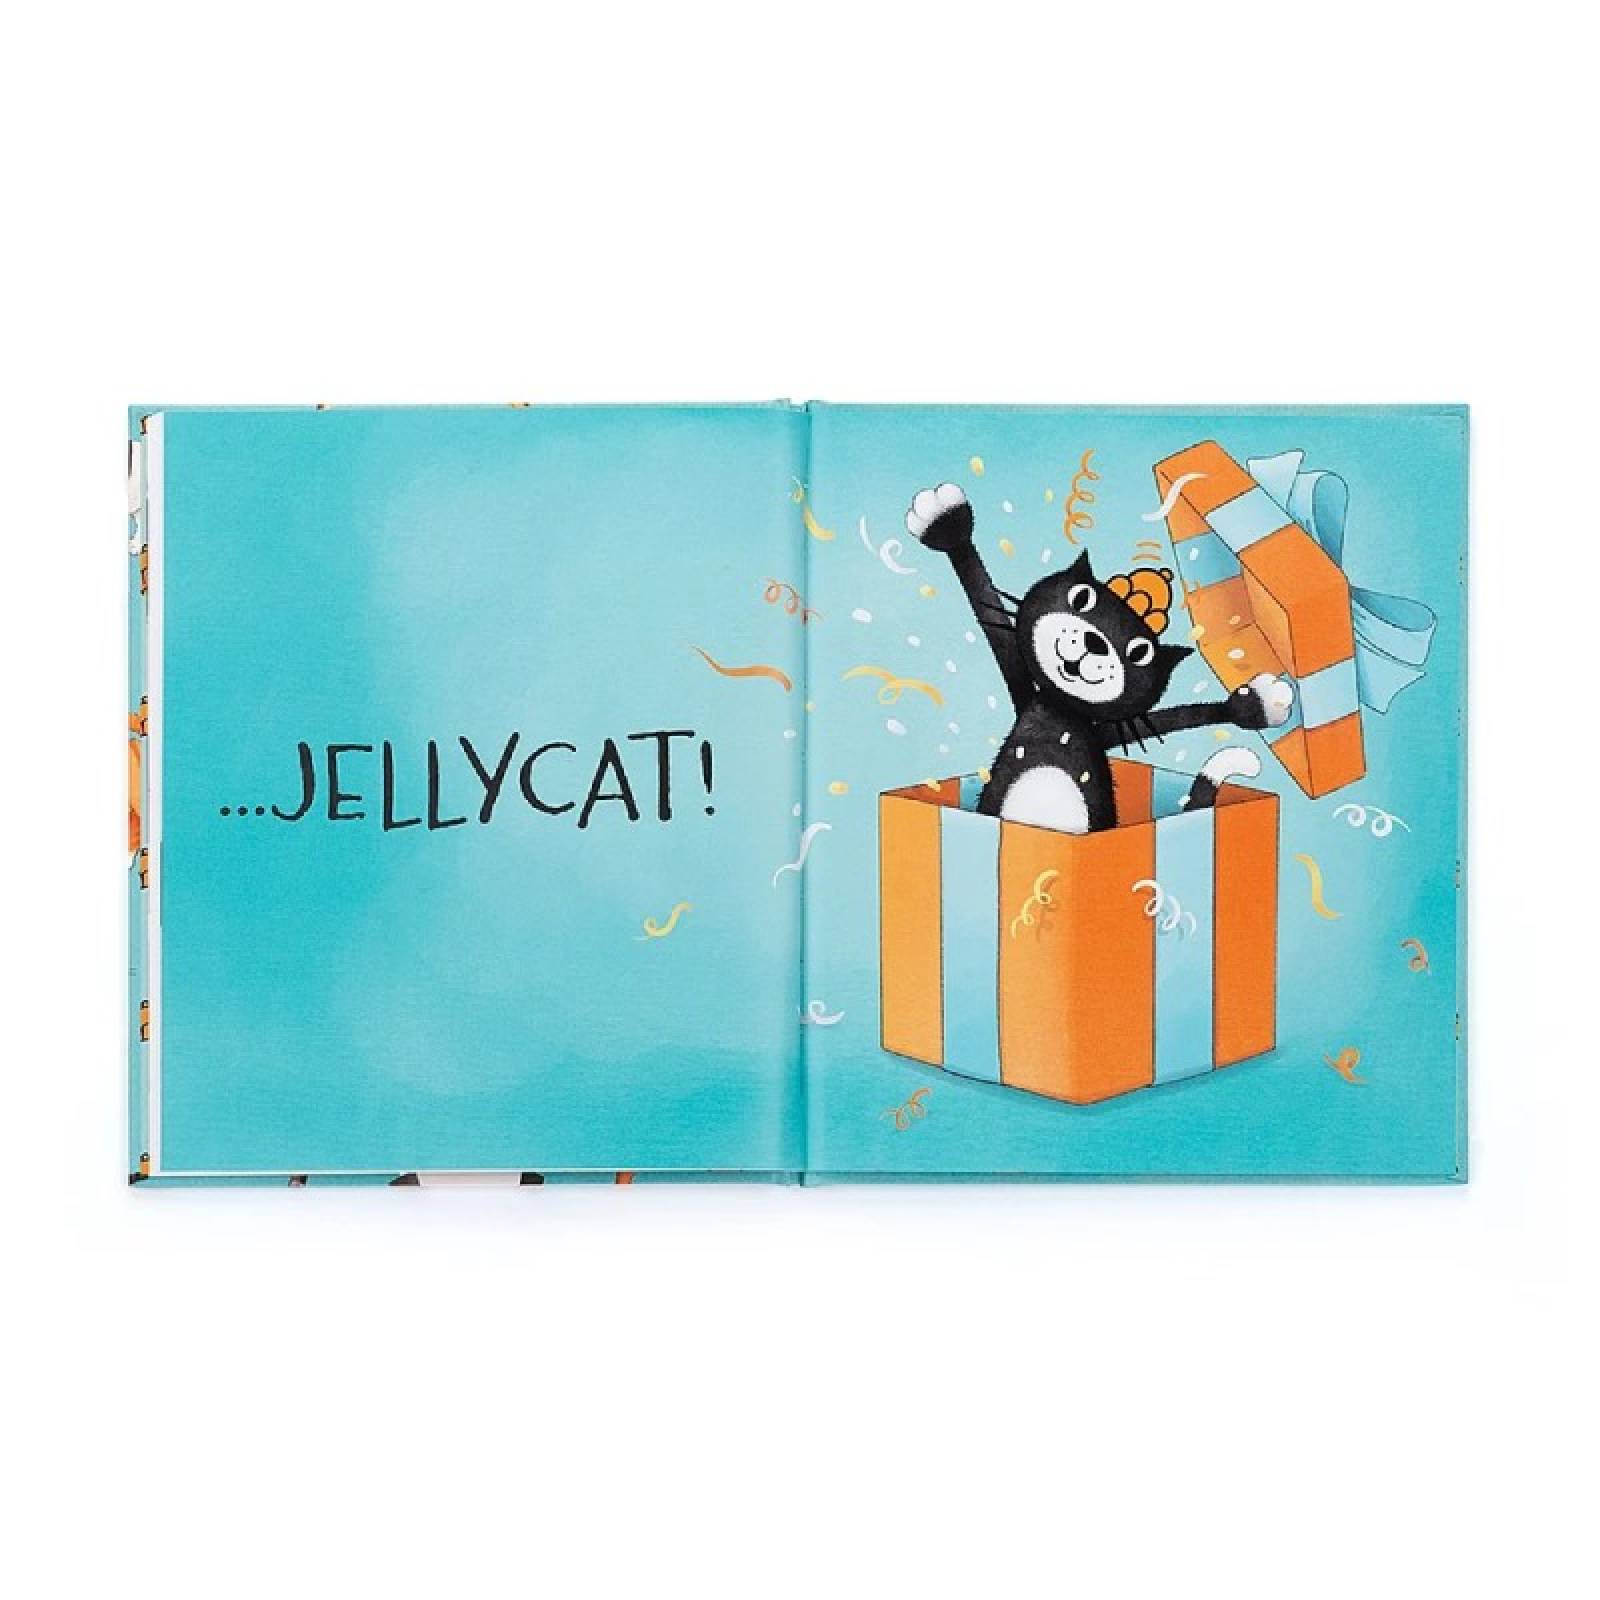 All Kinds Of Cats Book By Jellycat thumbnails